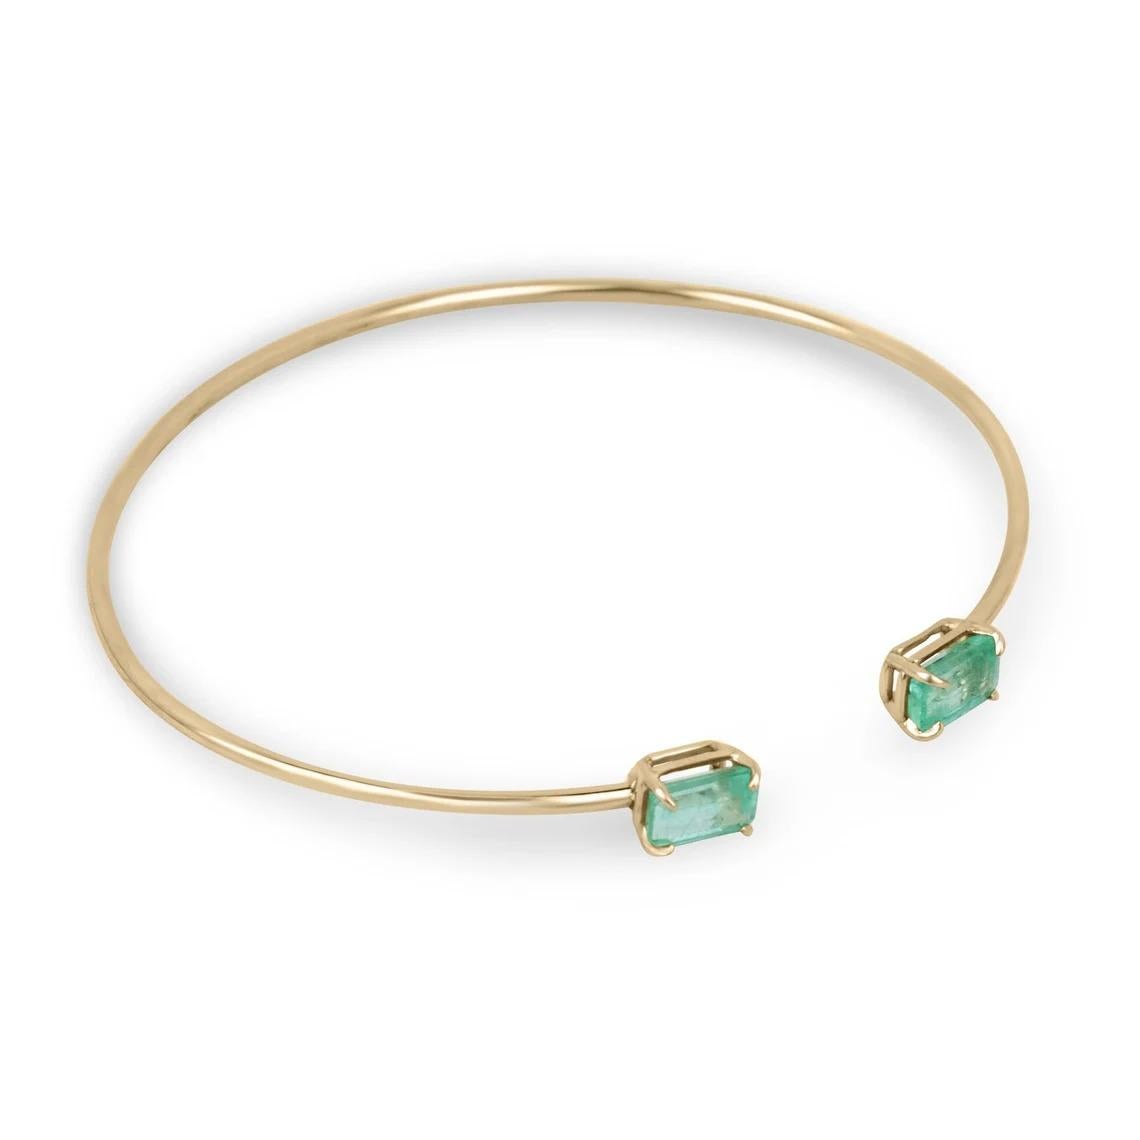 The toi et moi cuff bangle bracelet is a stunning piece of jewelry that symbolizes the intertwining of two individuals. This exquisite bracelet features two emerald cut emeralds, weighing a total of 2.30 carats, set in a four claw prong setting. The